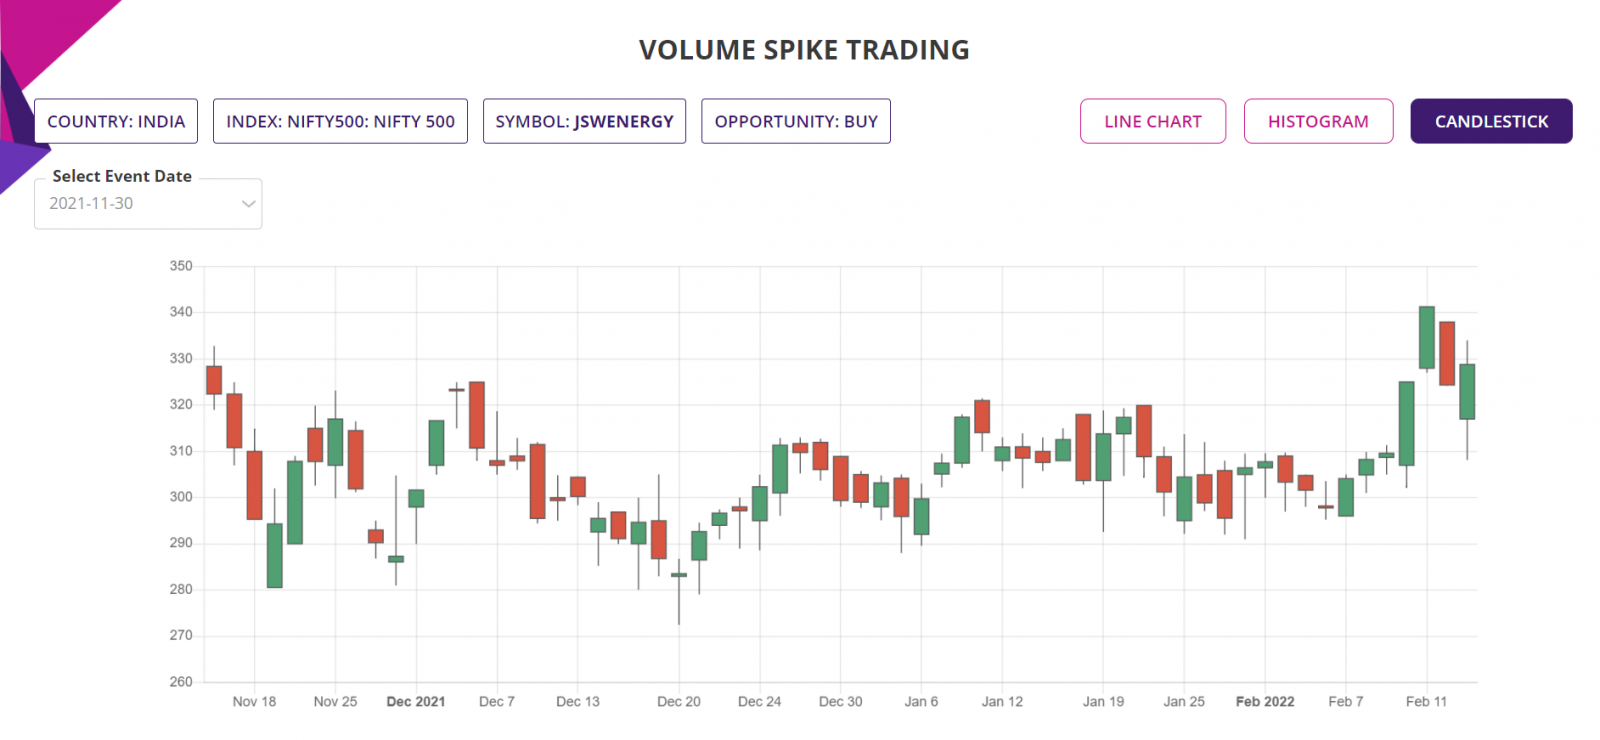 Volume spike trading, India, candlestick chart